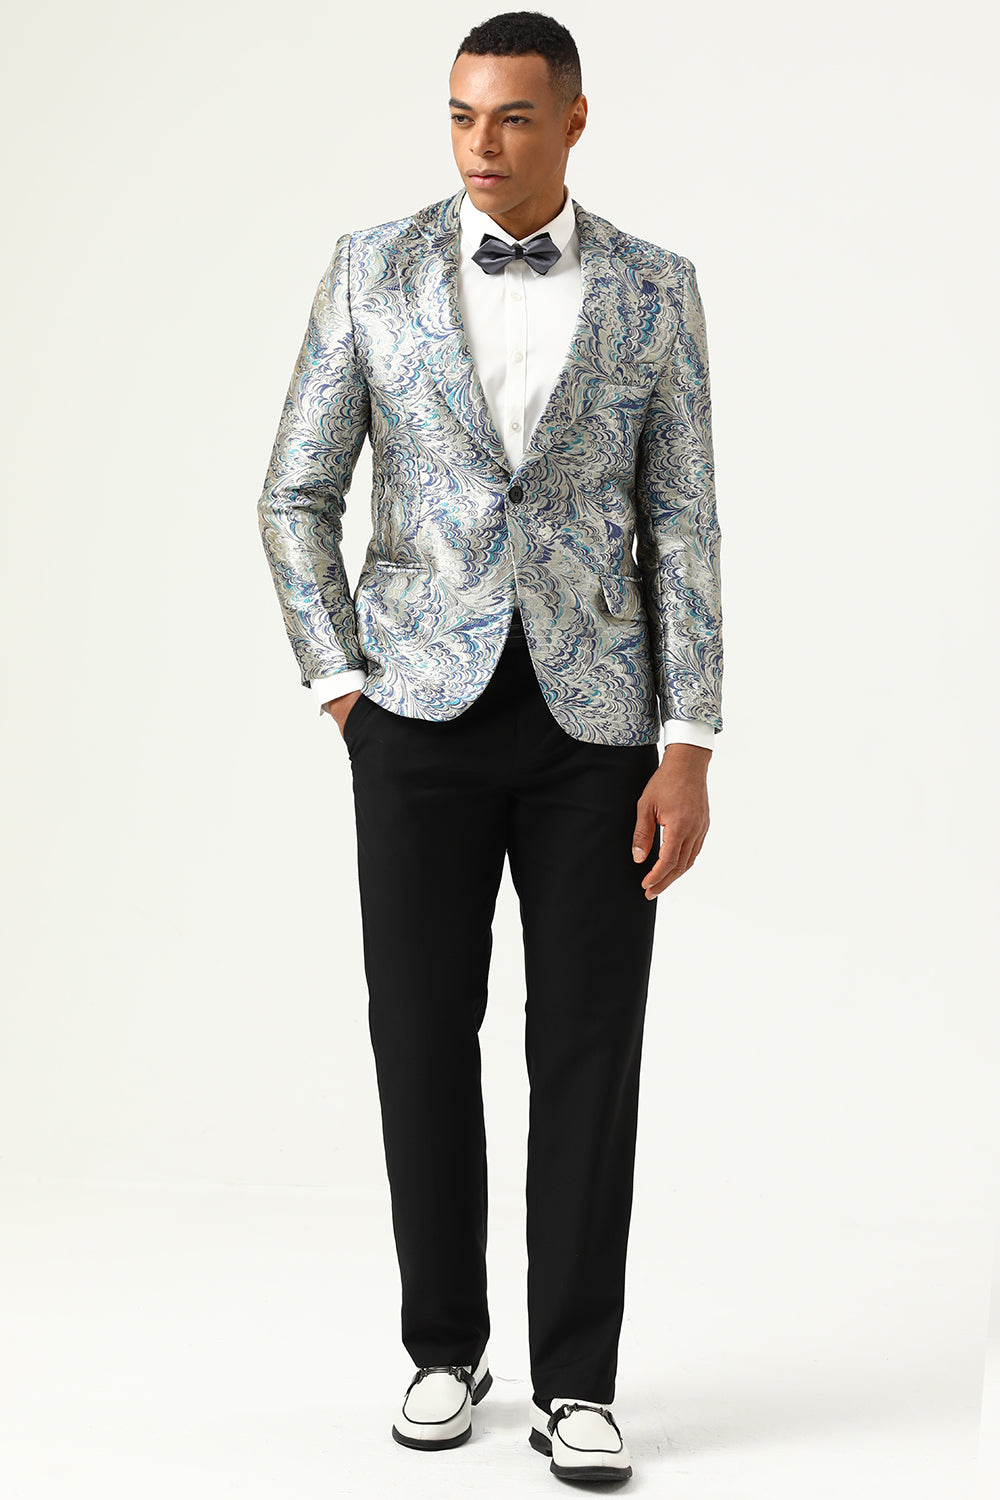 Silver and Blue Jacquard Notched Lapel Men's Prom Blazer